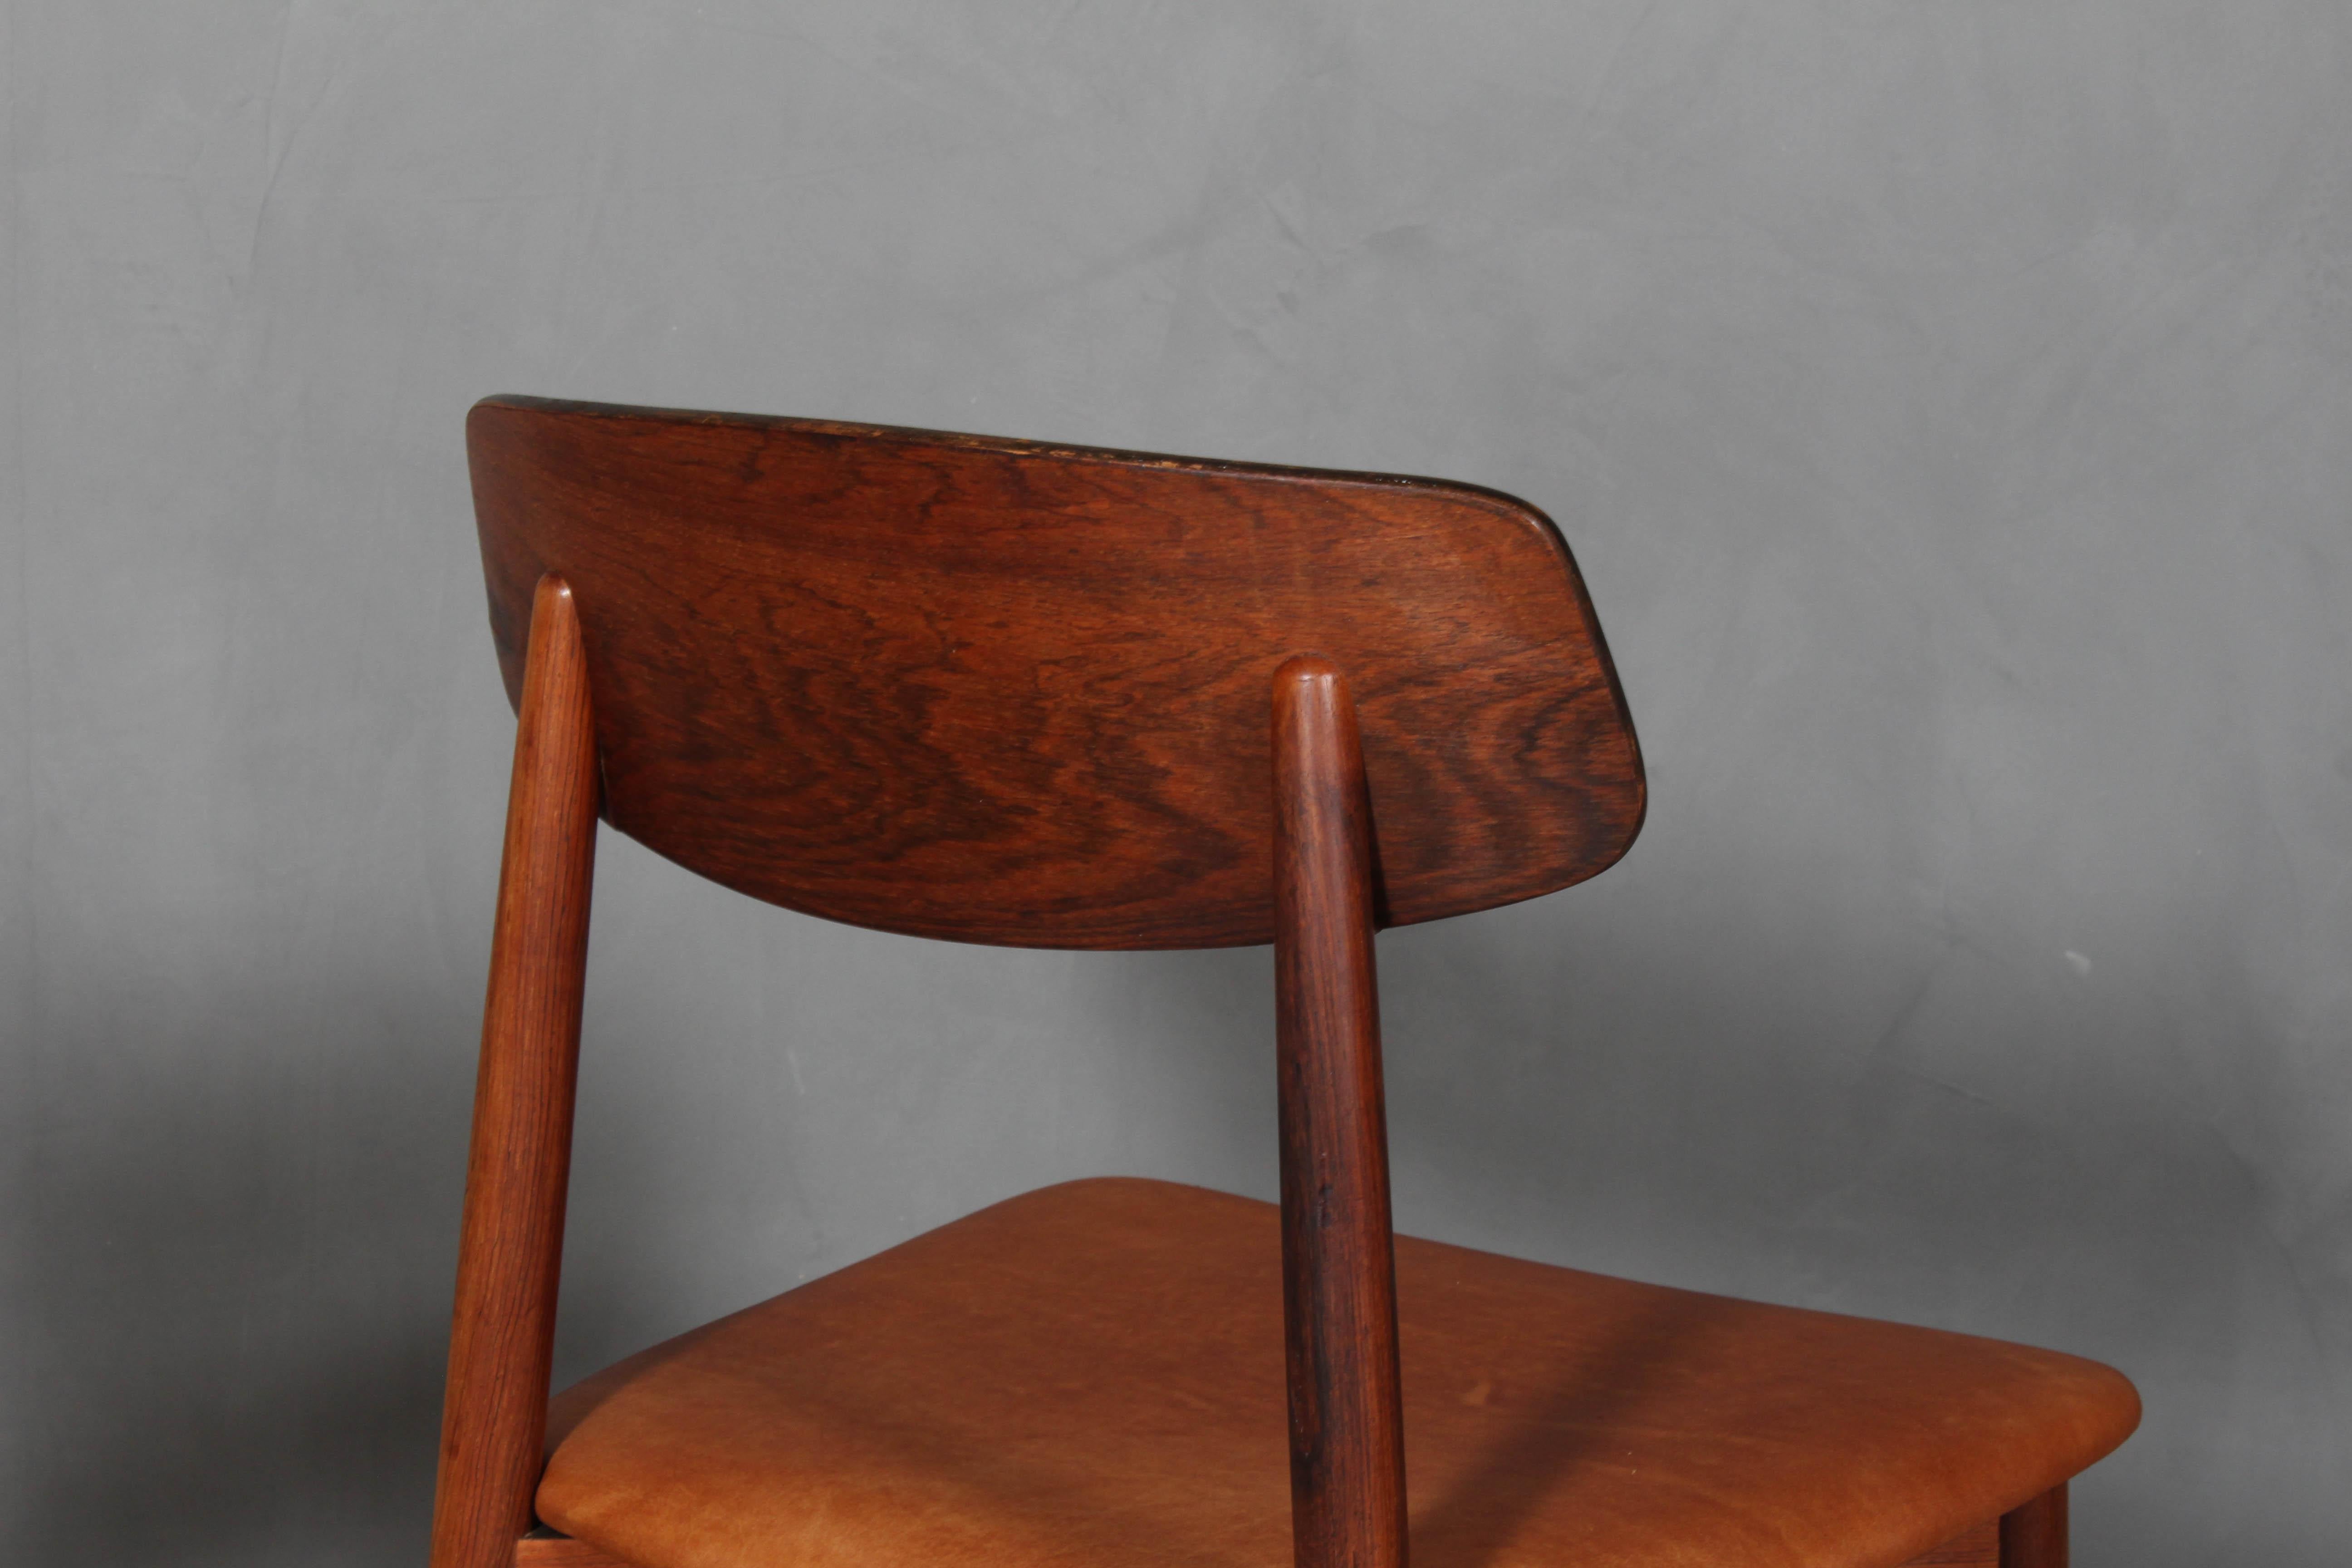 Harry Østergaard, four Chairs in Rosewood and Tan Aniline Leather, 1970s (Mitte des 20. Jahrhunderts)